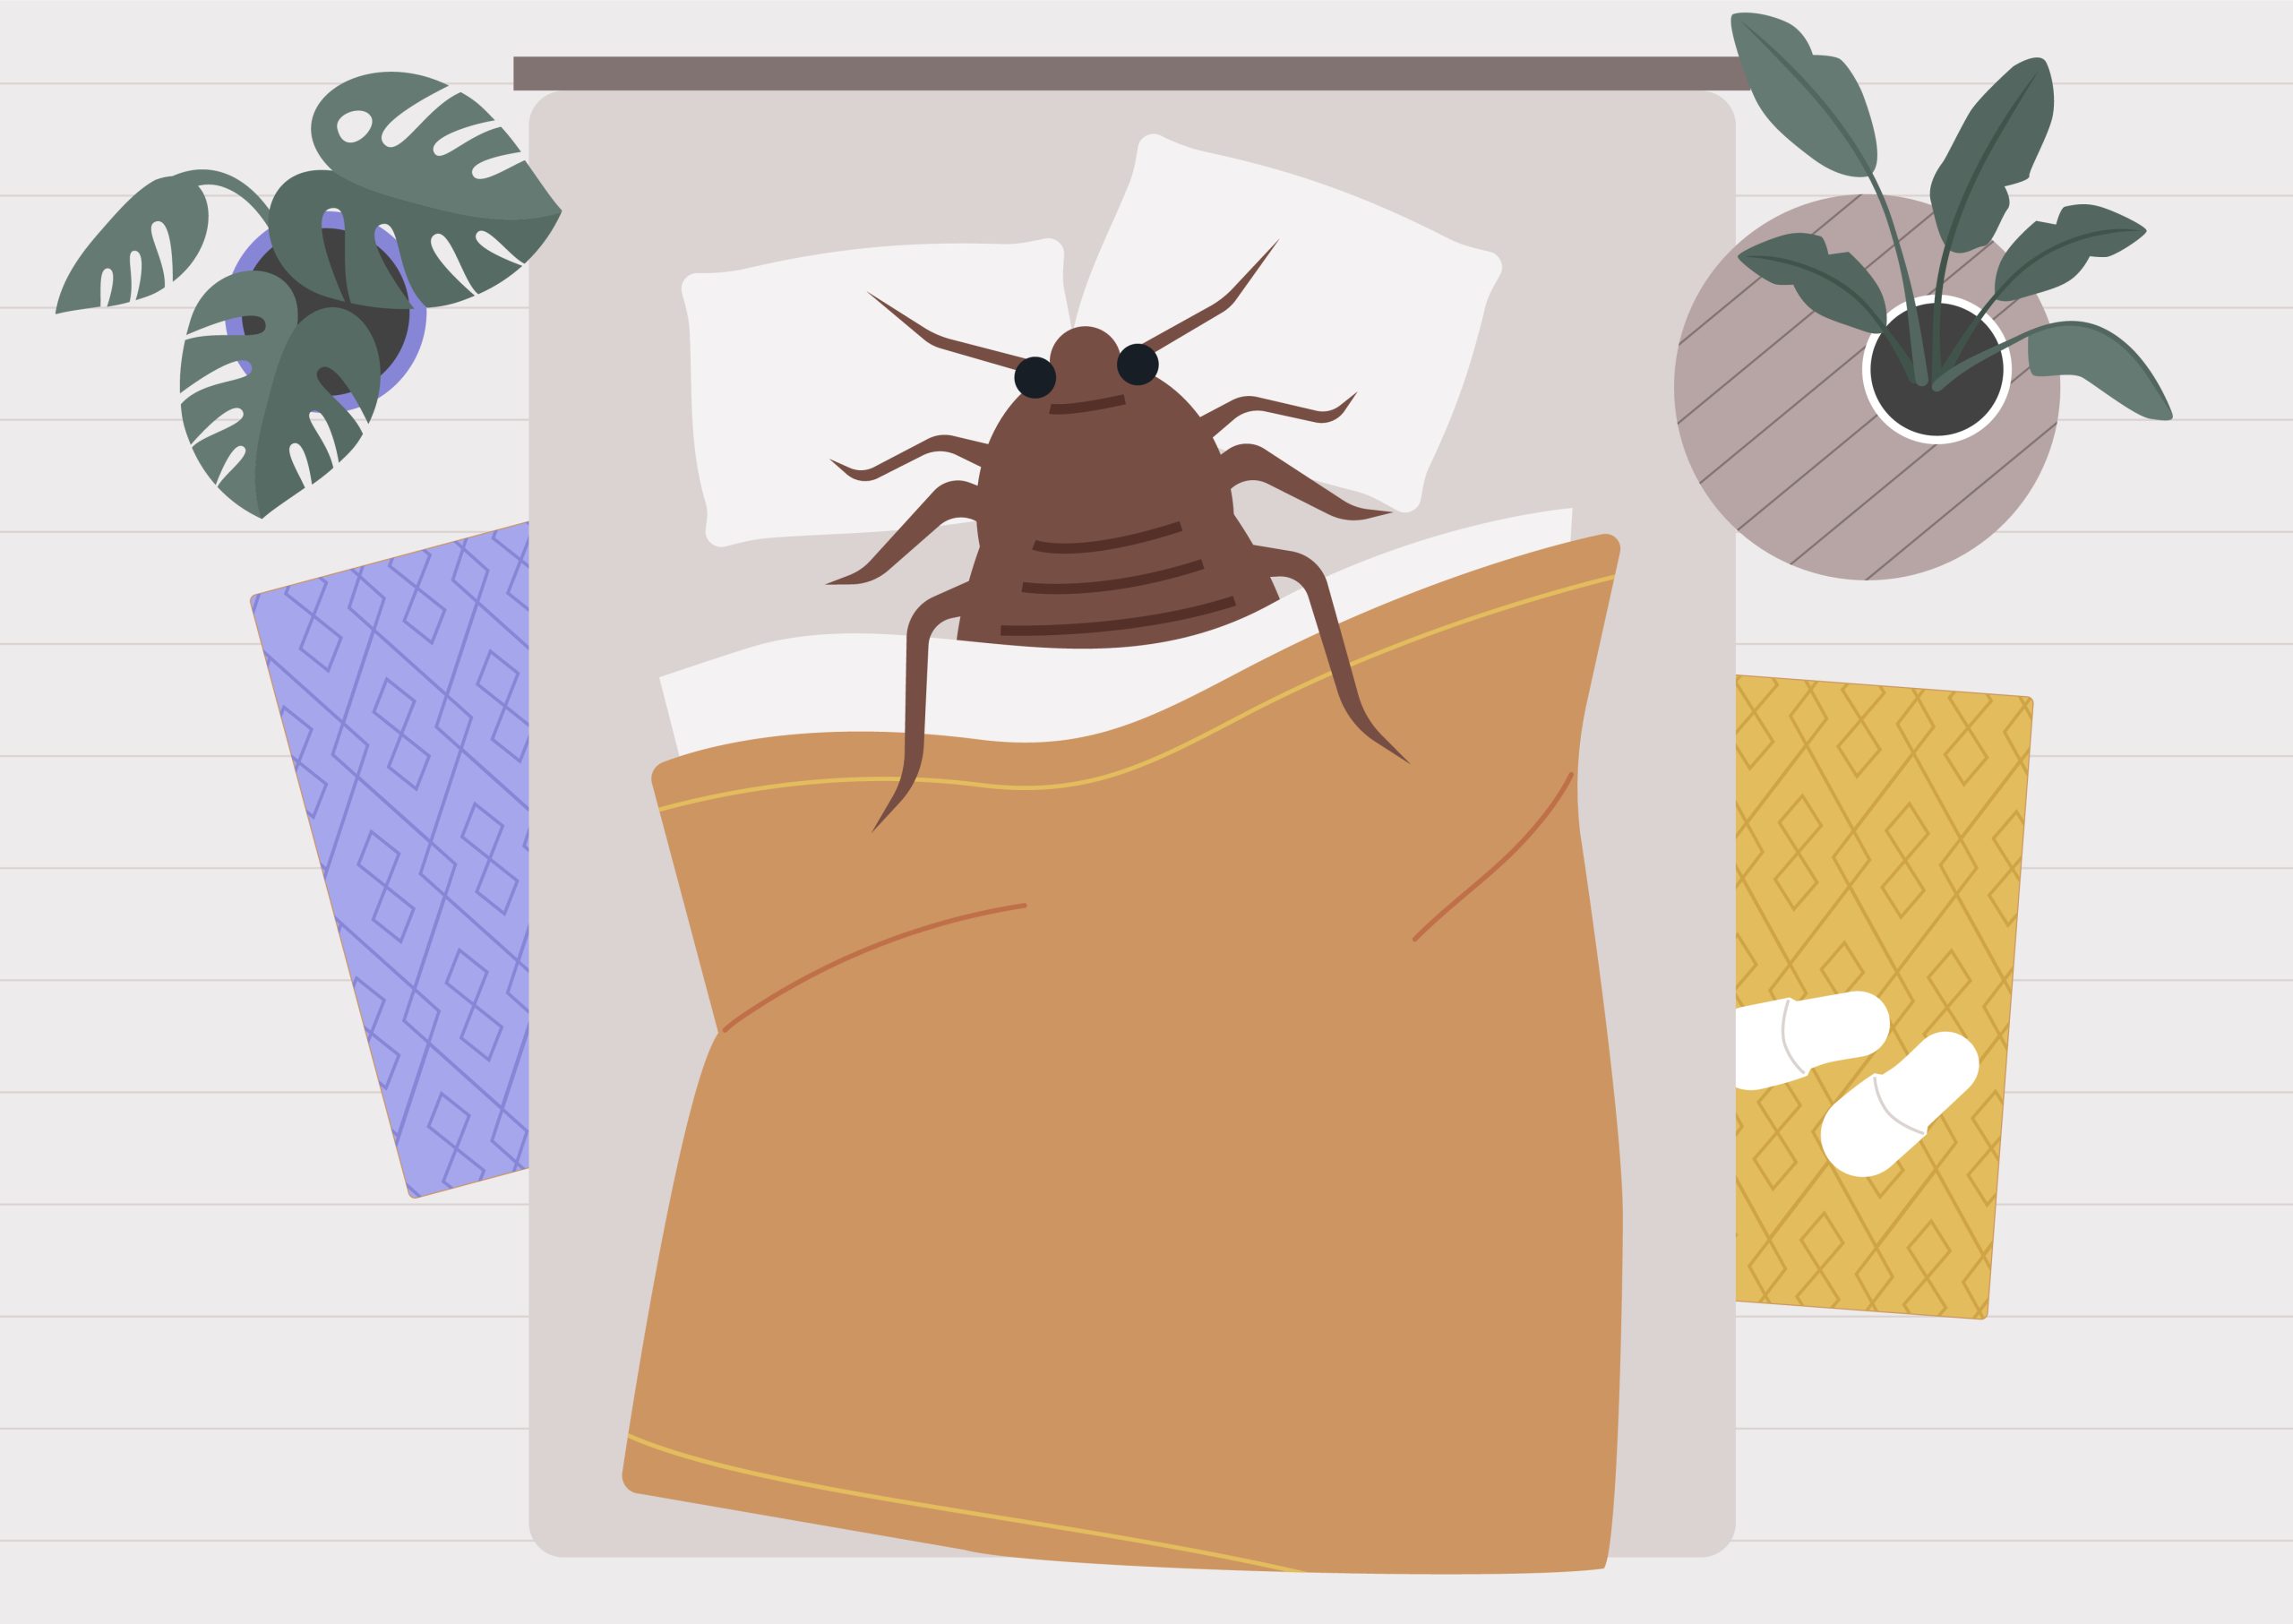 What not to do with bed bugs?